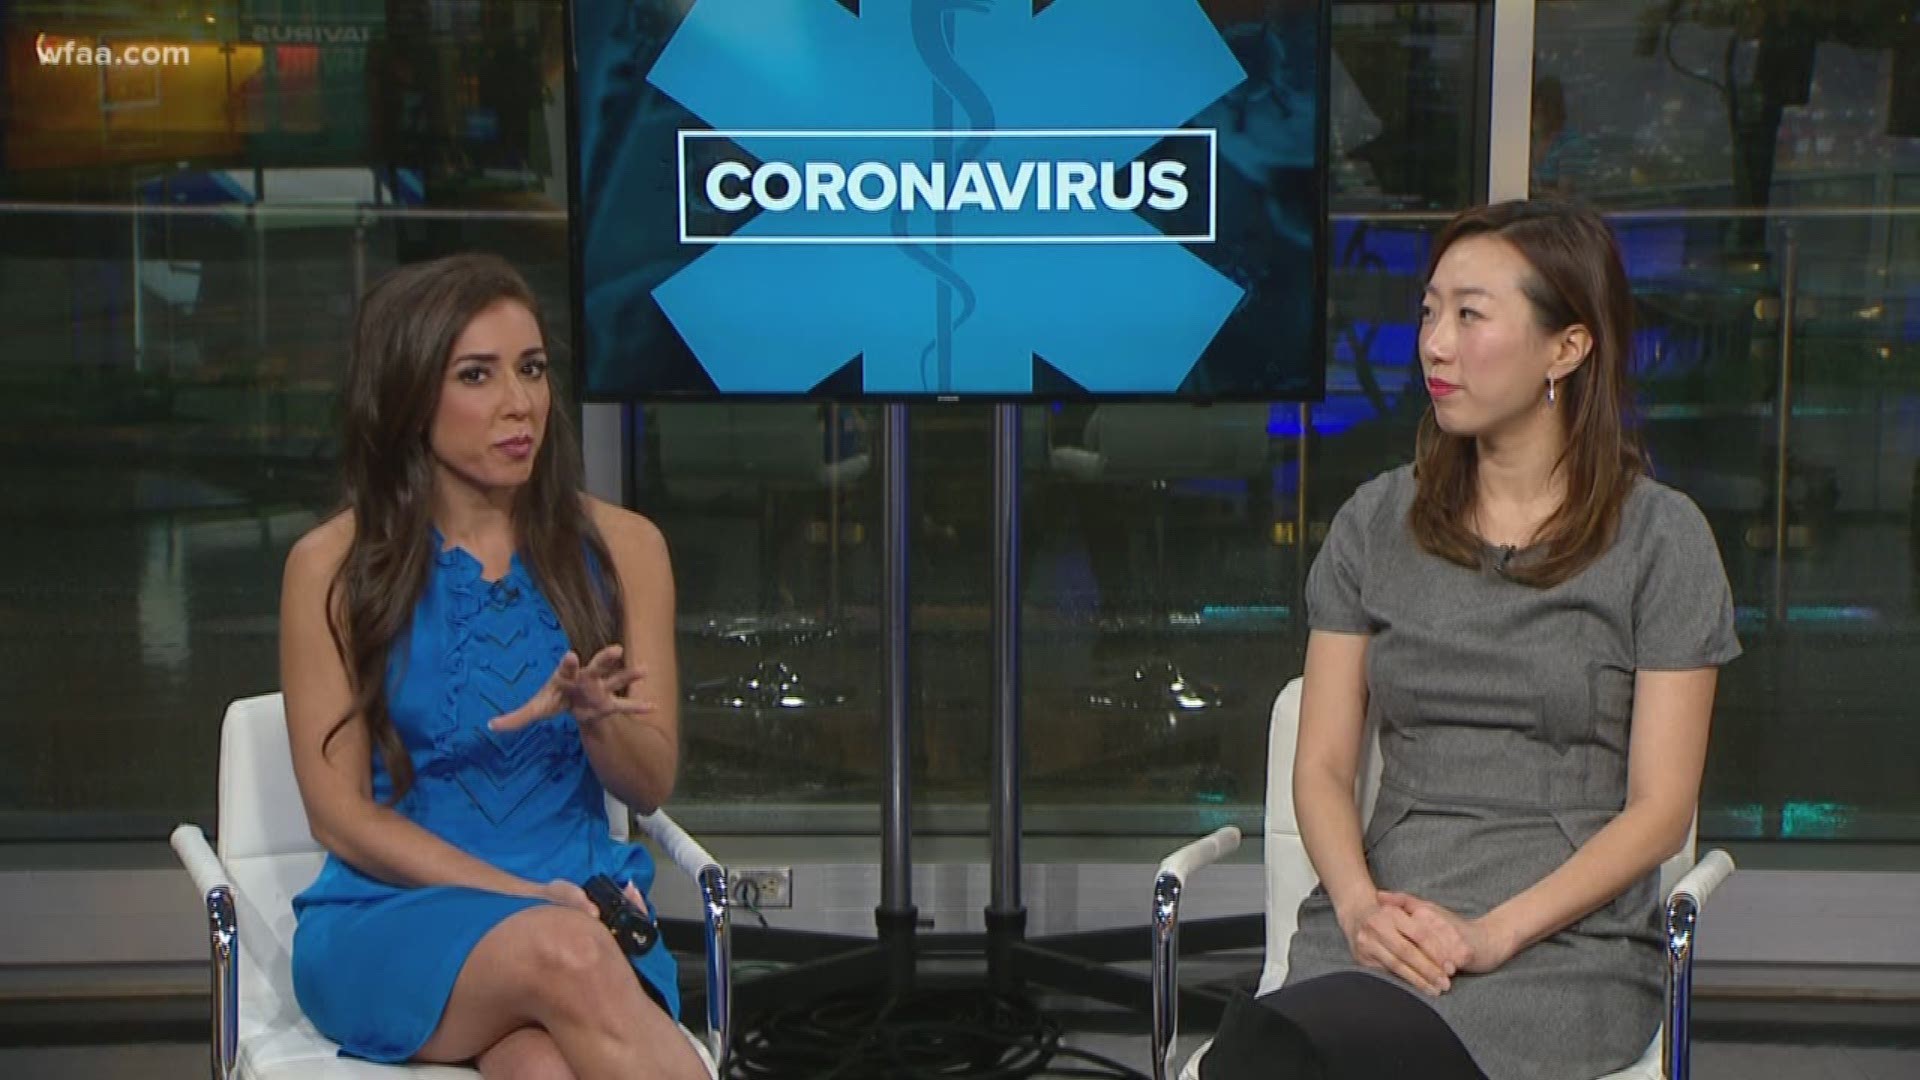 WFAA's Sonia Azad and Dr. Rachel Park answer your COVID-19 questions and explain the difference in novel coronavirus, flu and allergy symptoms.